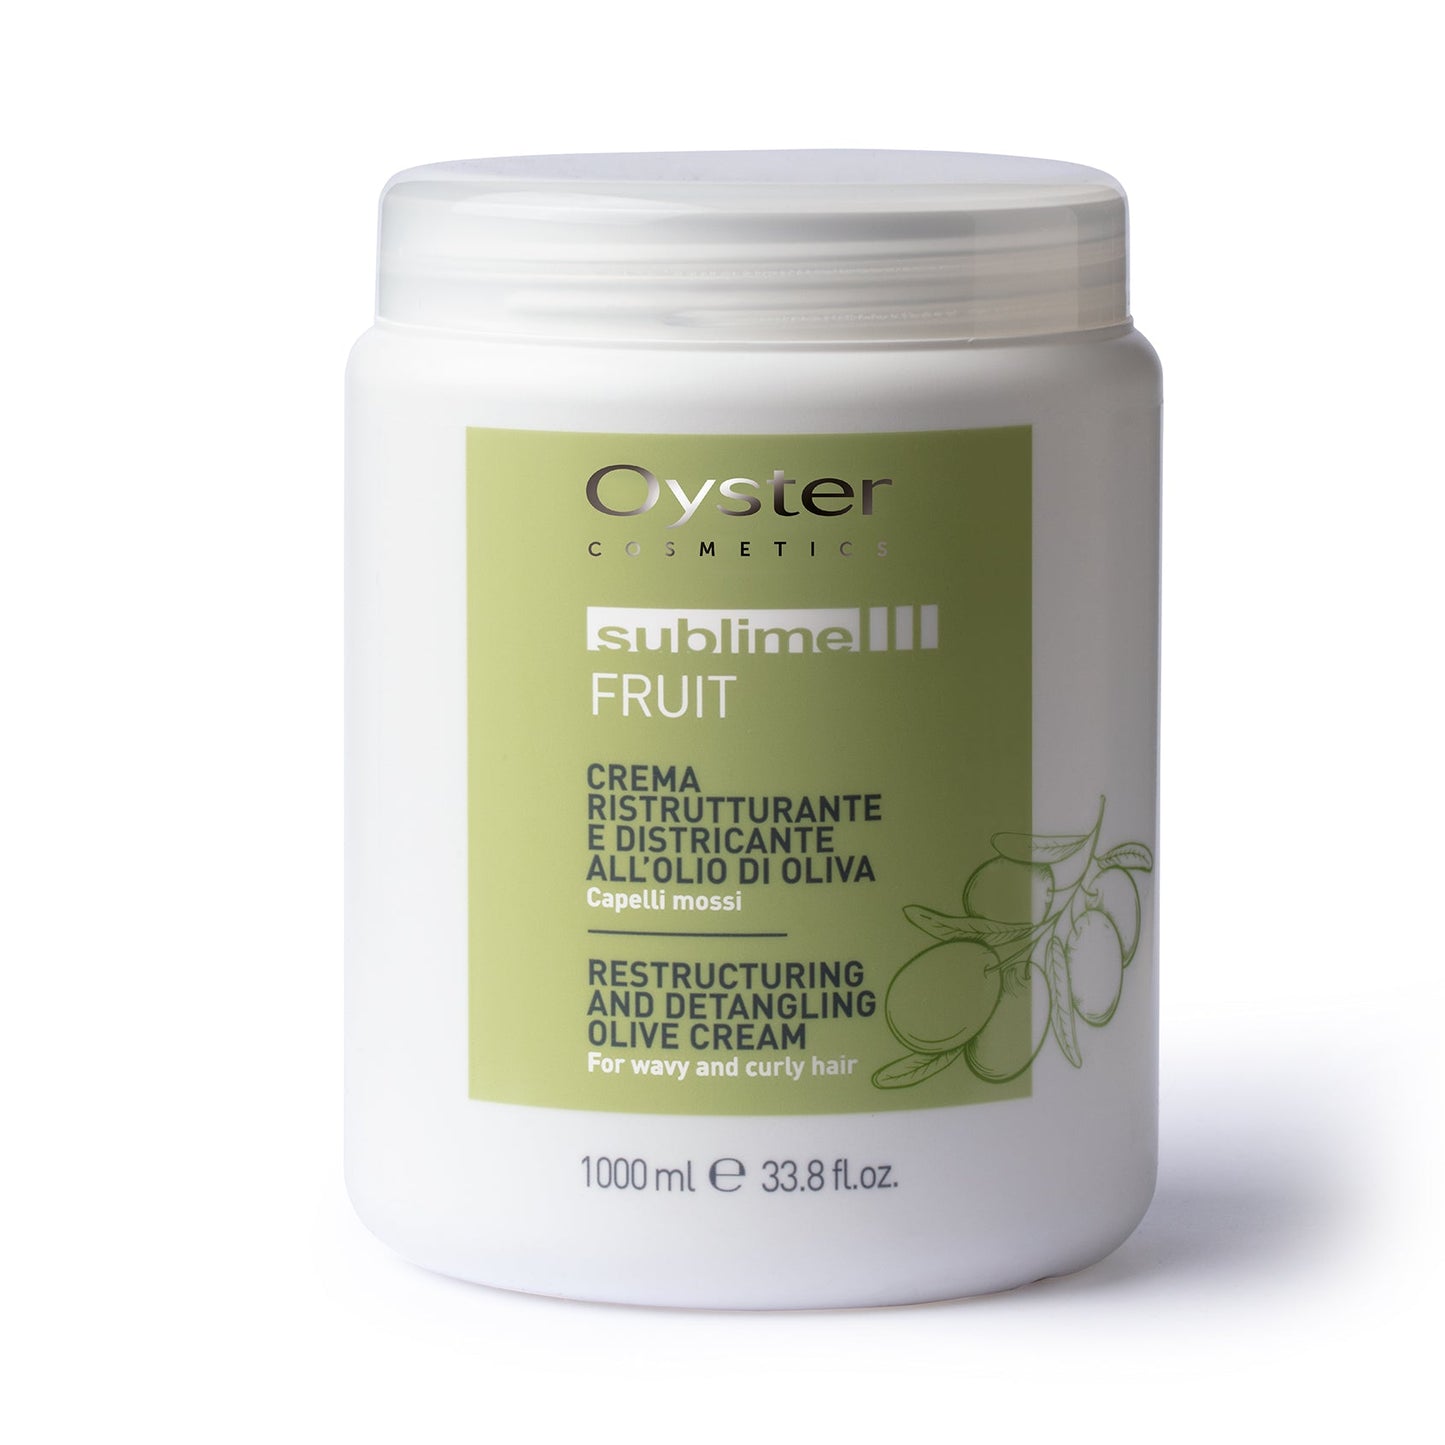 Olive Hair Cream | Sublime Fruit | OYSTER - SH Salons